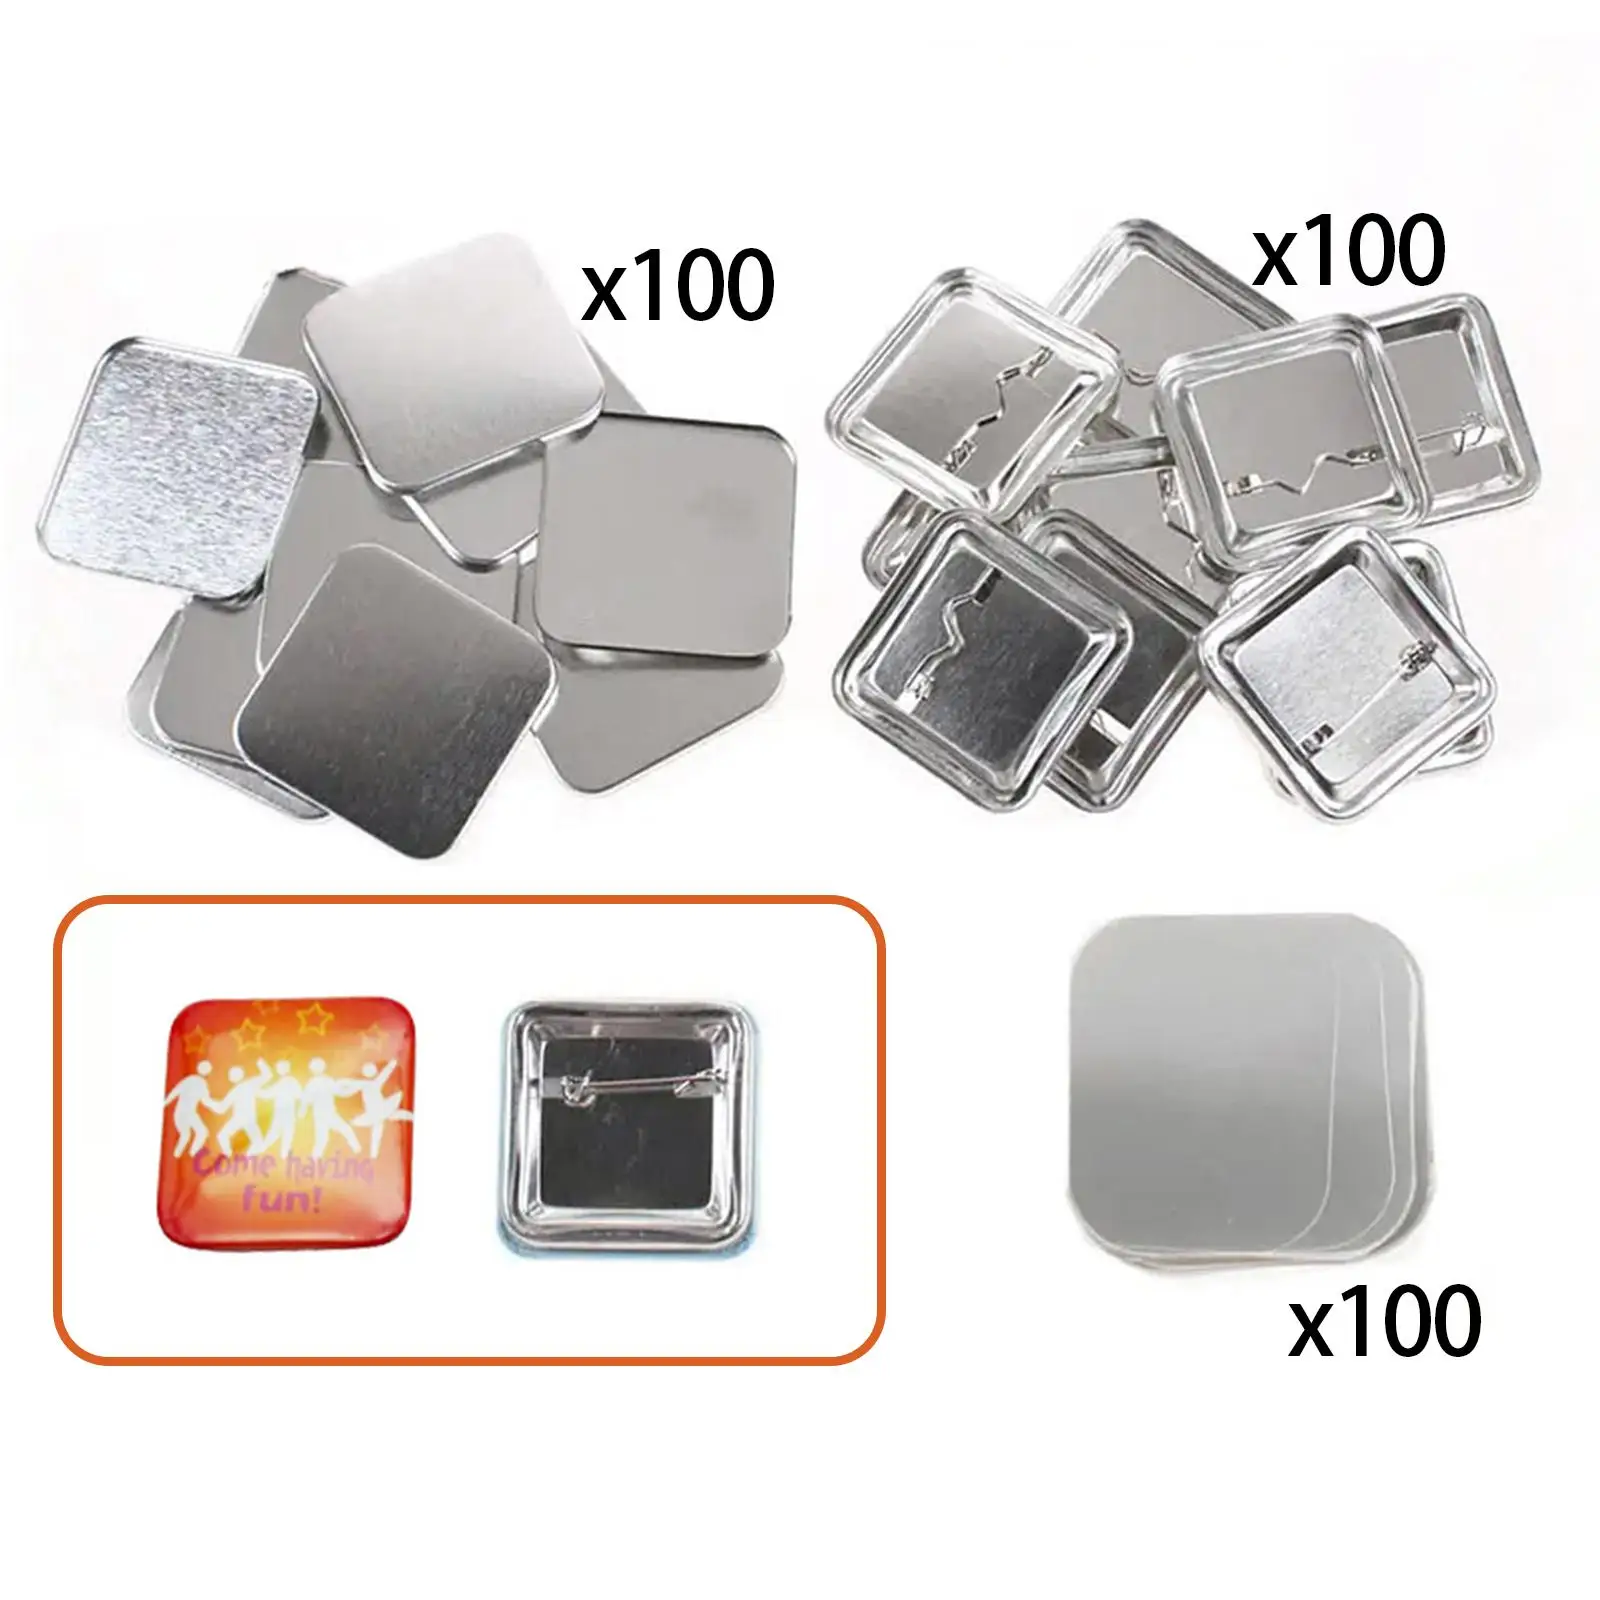 100Sets Blank Button Badge Parts Clear Mylar Component Metal Shells Button Maker for DIY Souvenirs Jewelry Making Gifts Craft